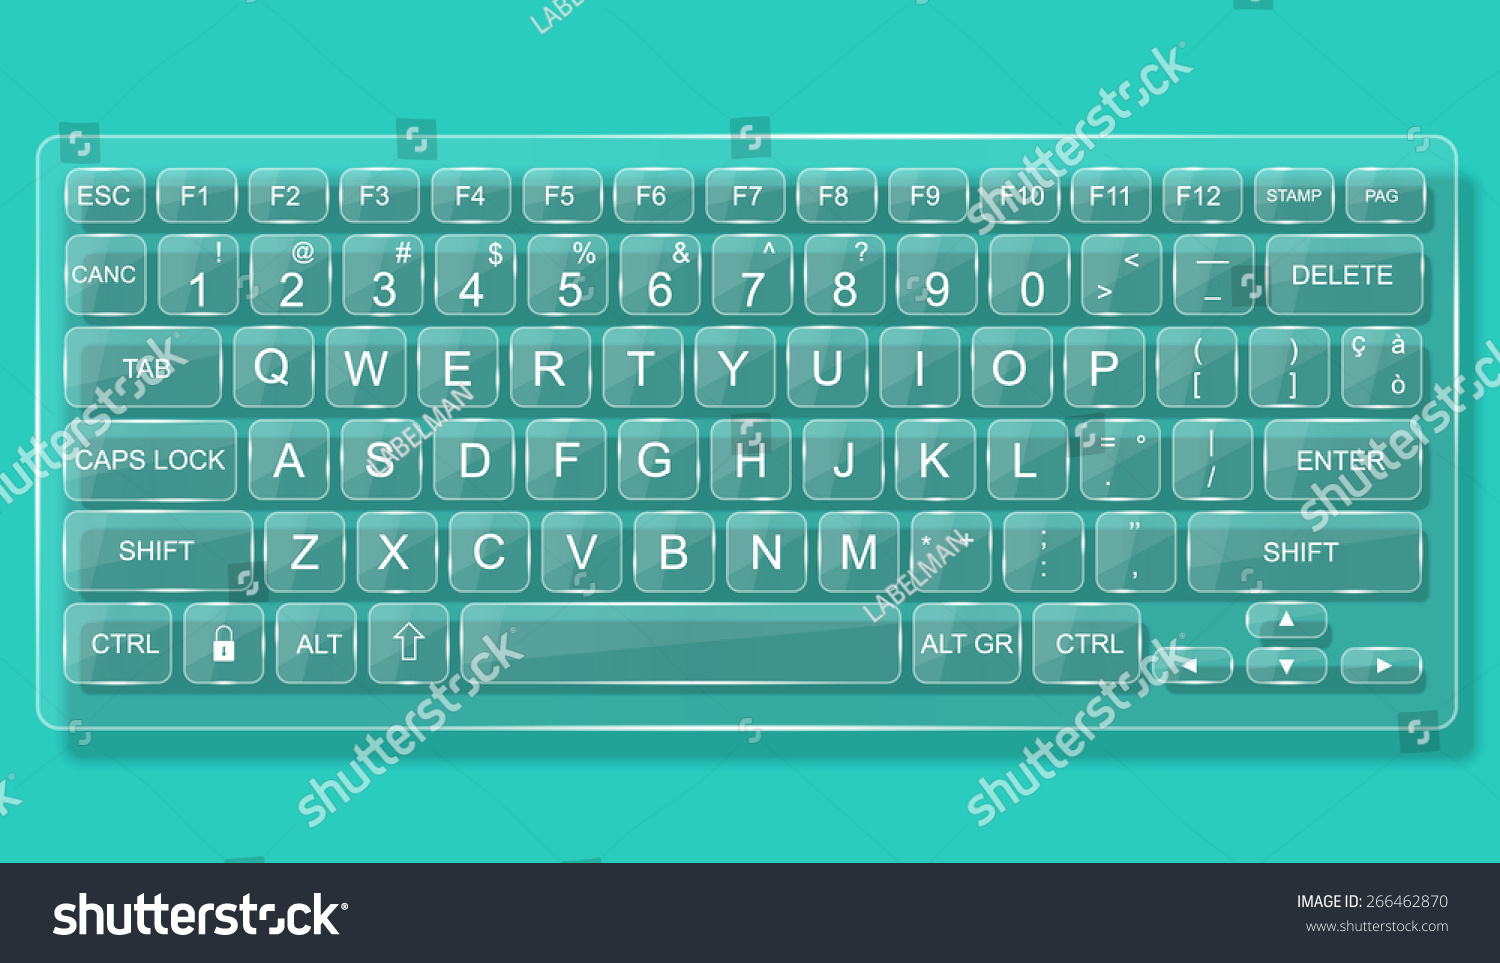 Keyboard Pc Mac Glass Whit Shadow Stock Vector Royalty Free 266462870